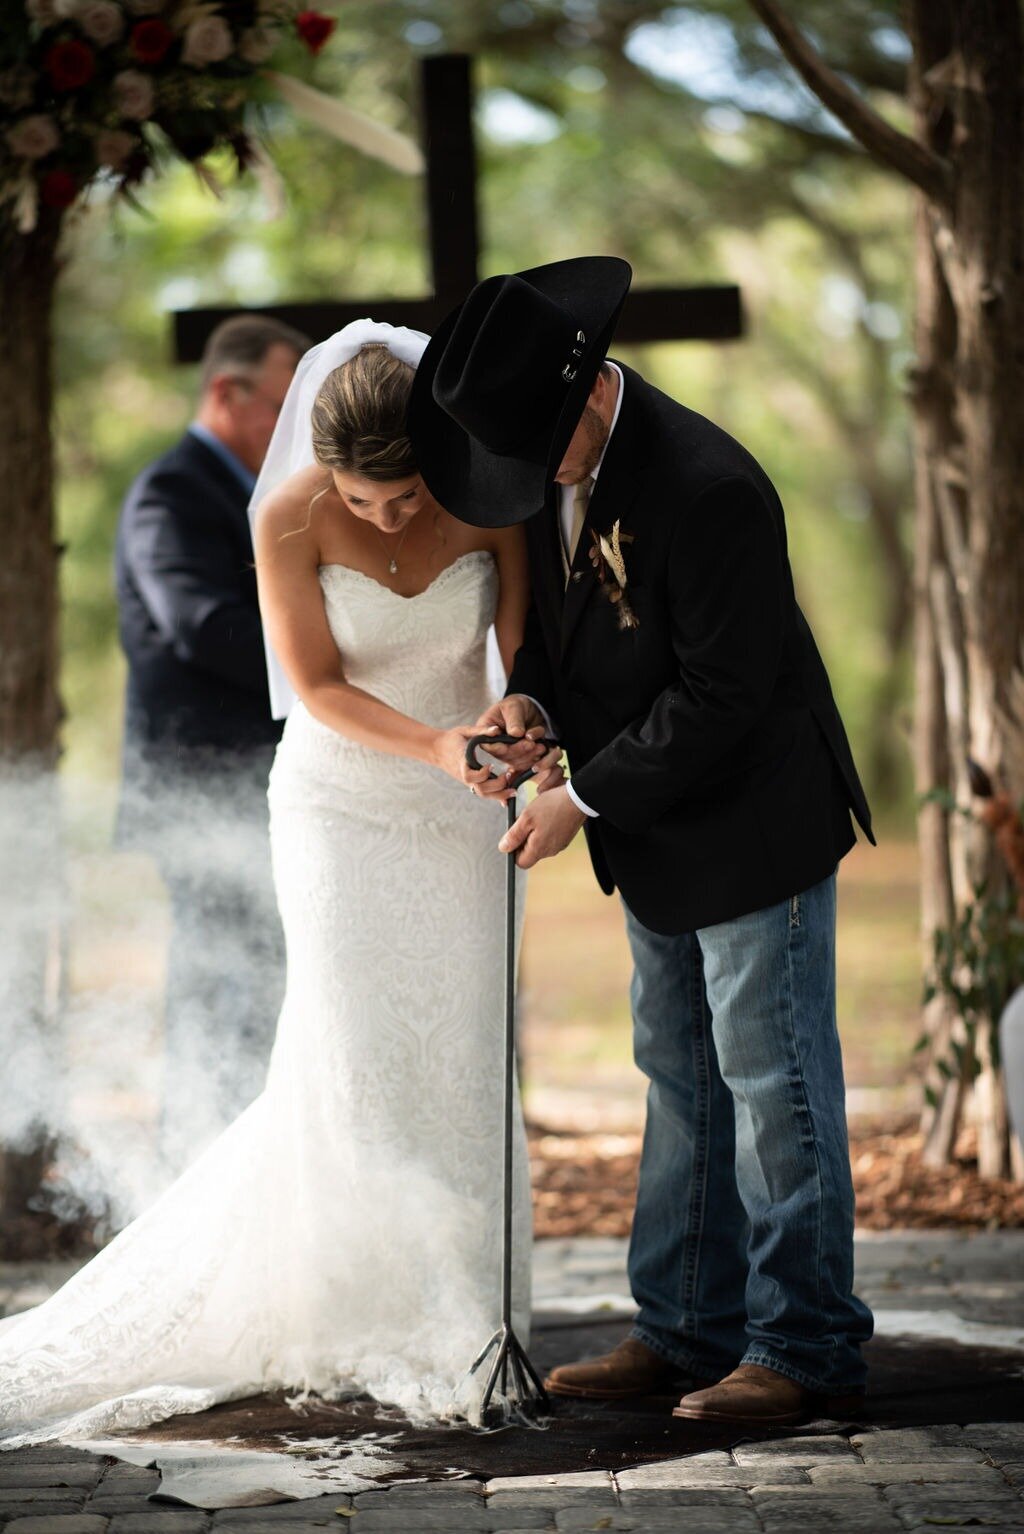 Legacy at Oak Meadows Wedding Venue - Pierson - Gainesville Florida - Weddings and Events158